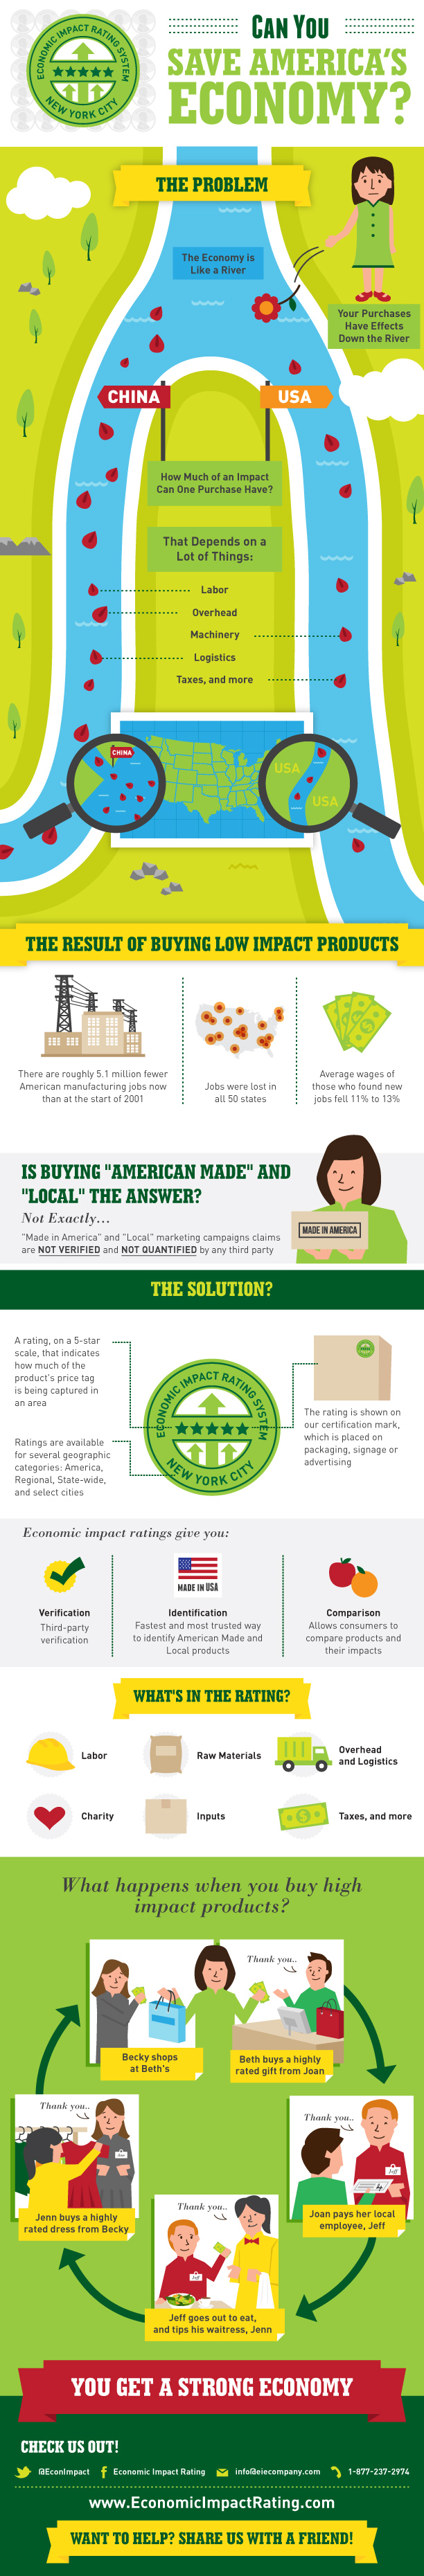 Infographic for Can You Save America's Economy?